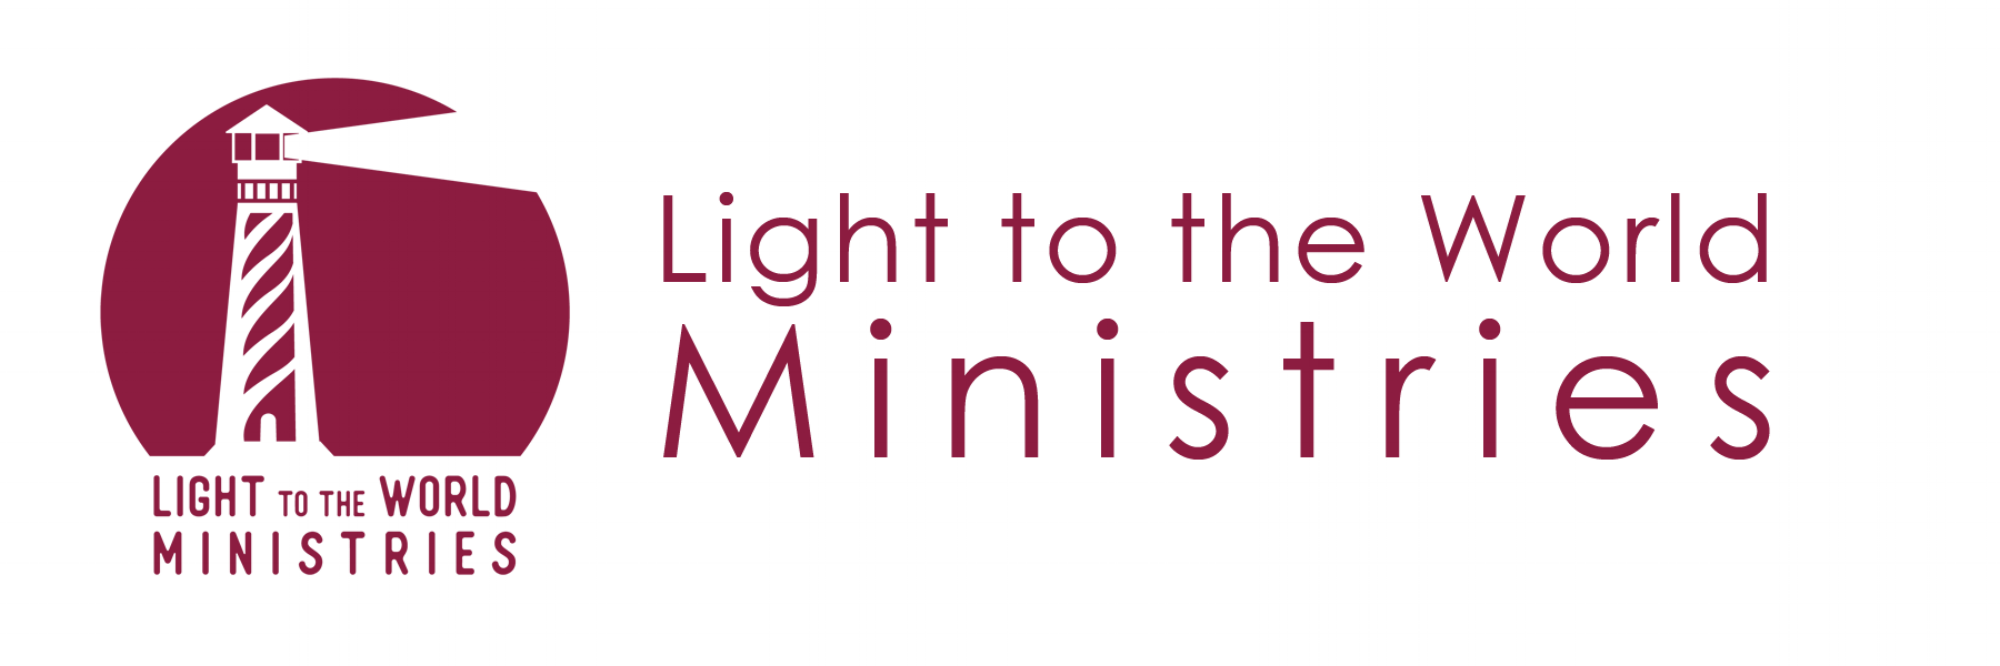 Light to the World Ministries